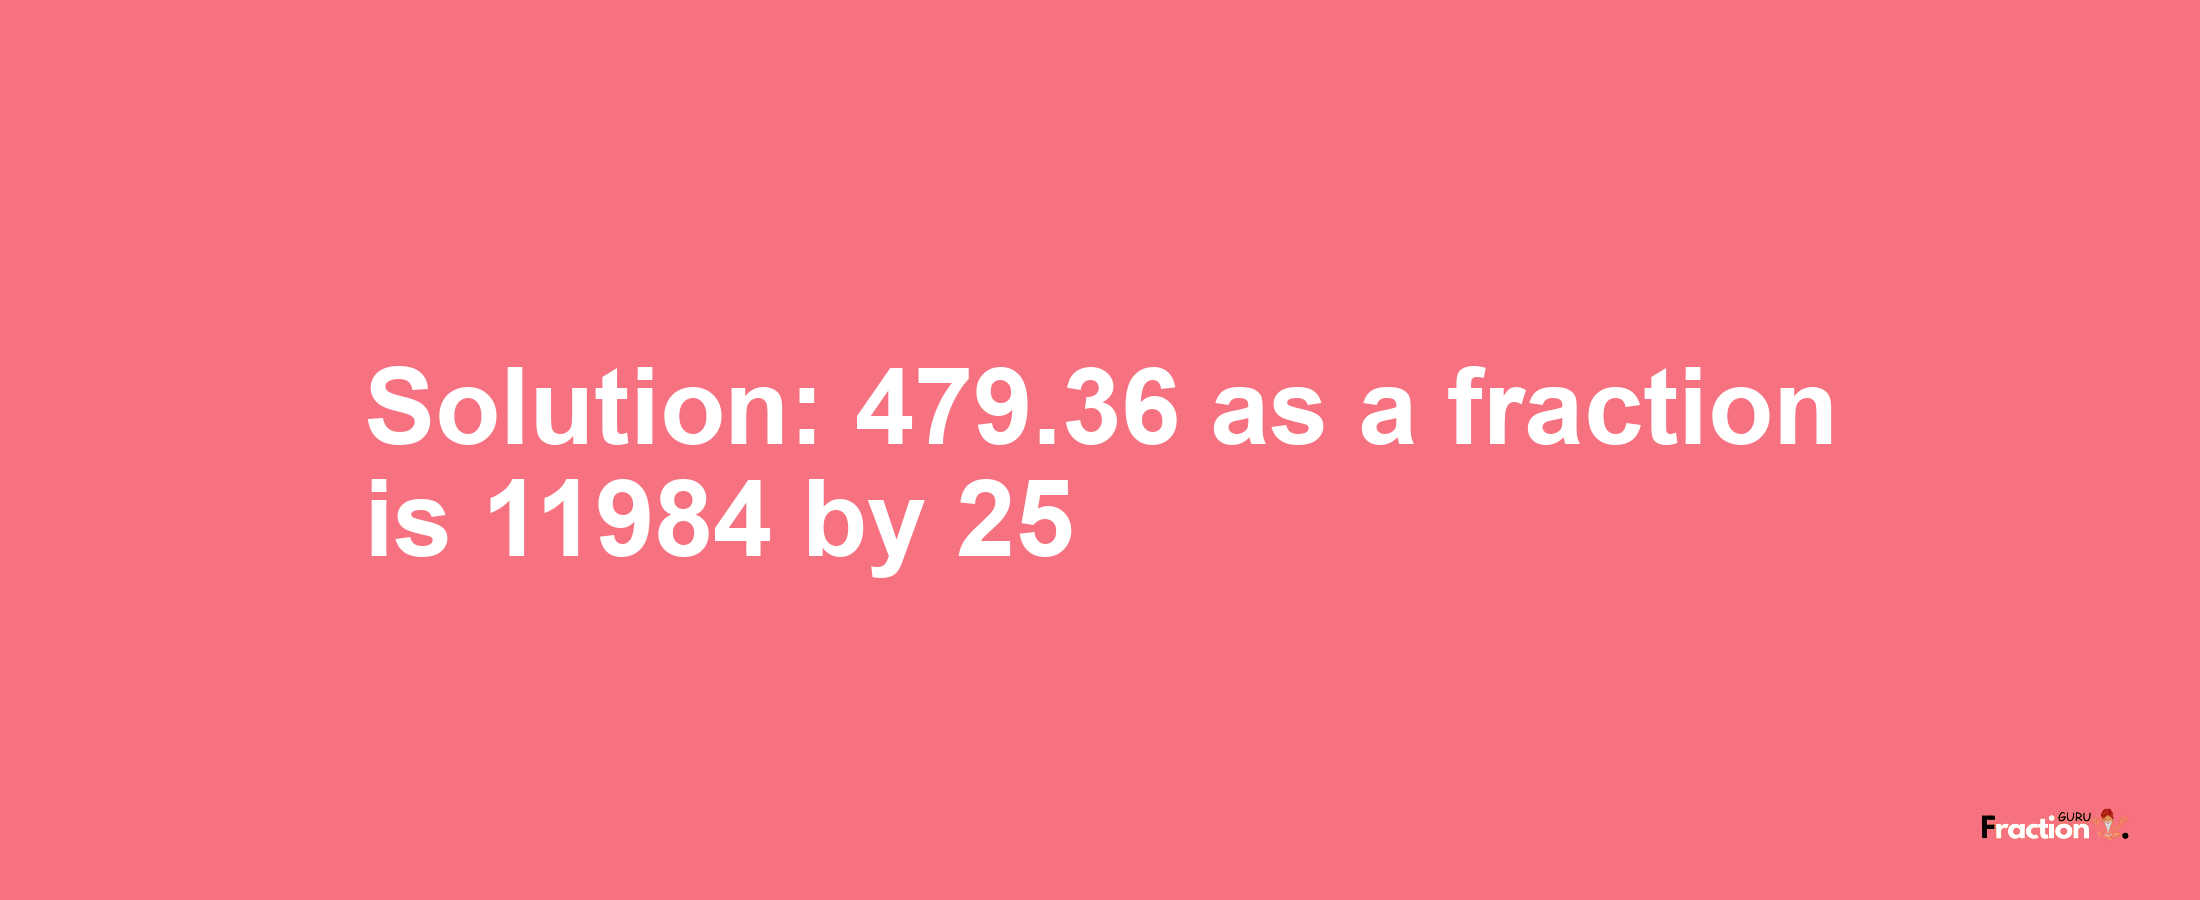 Solution:479.36 as a fraction is 11984/25